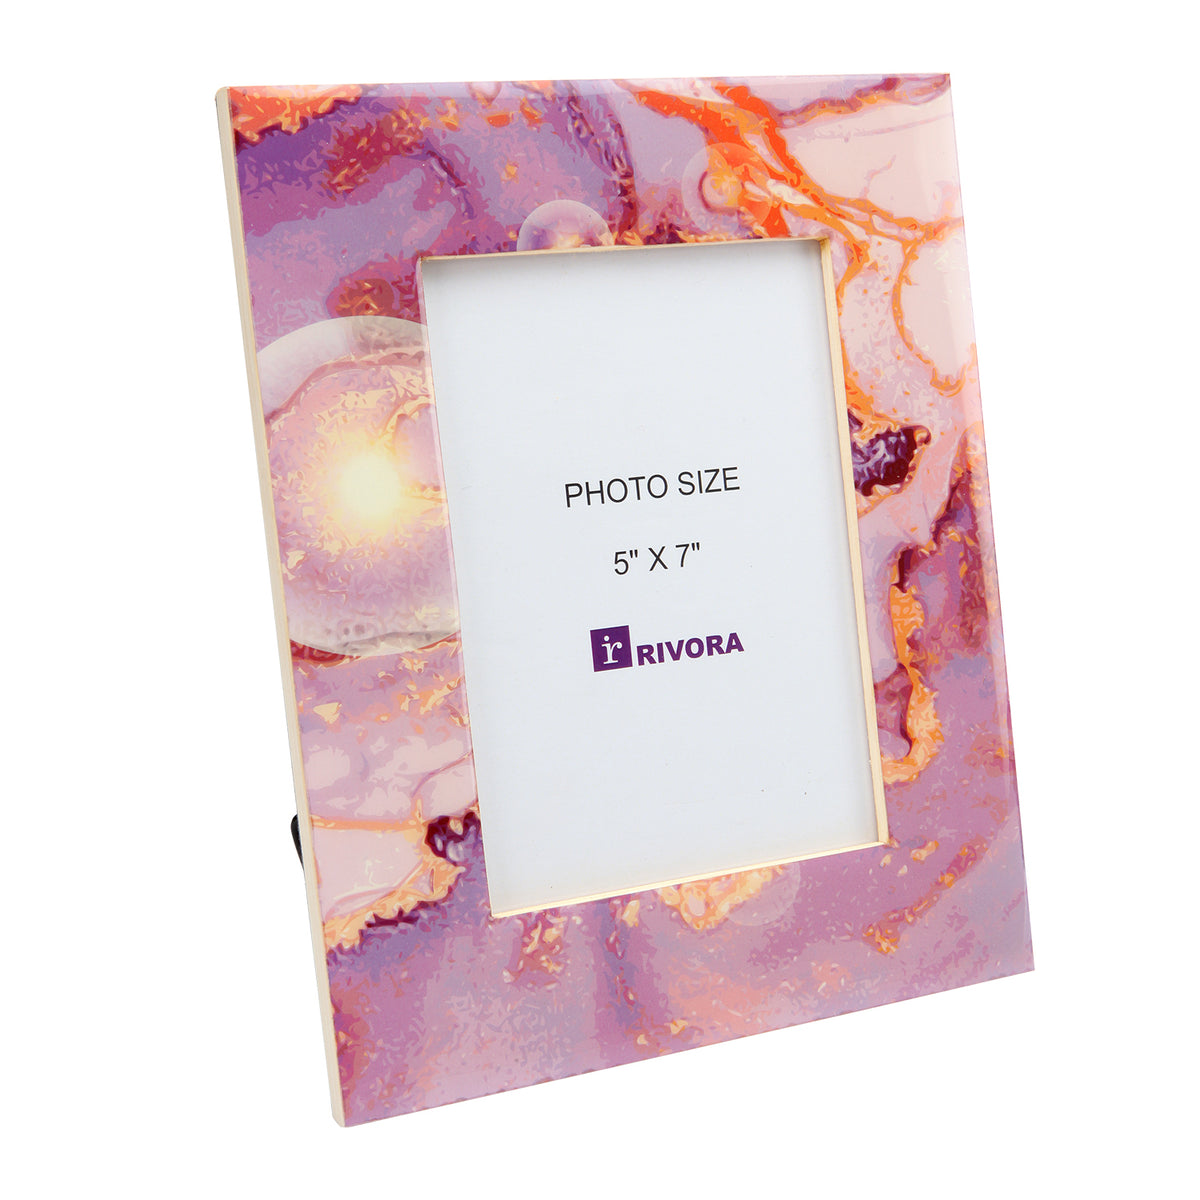 Wood Photo Frame With Geode Print Resin Lamination | Photo Frame